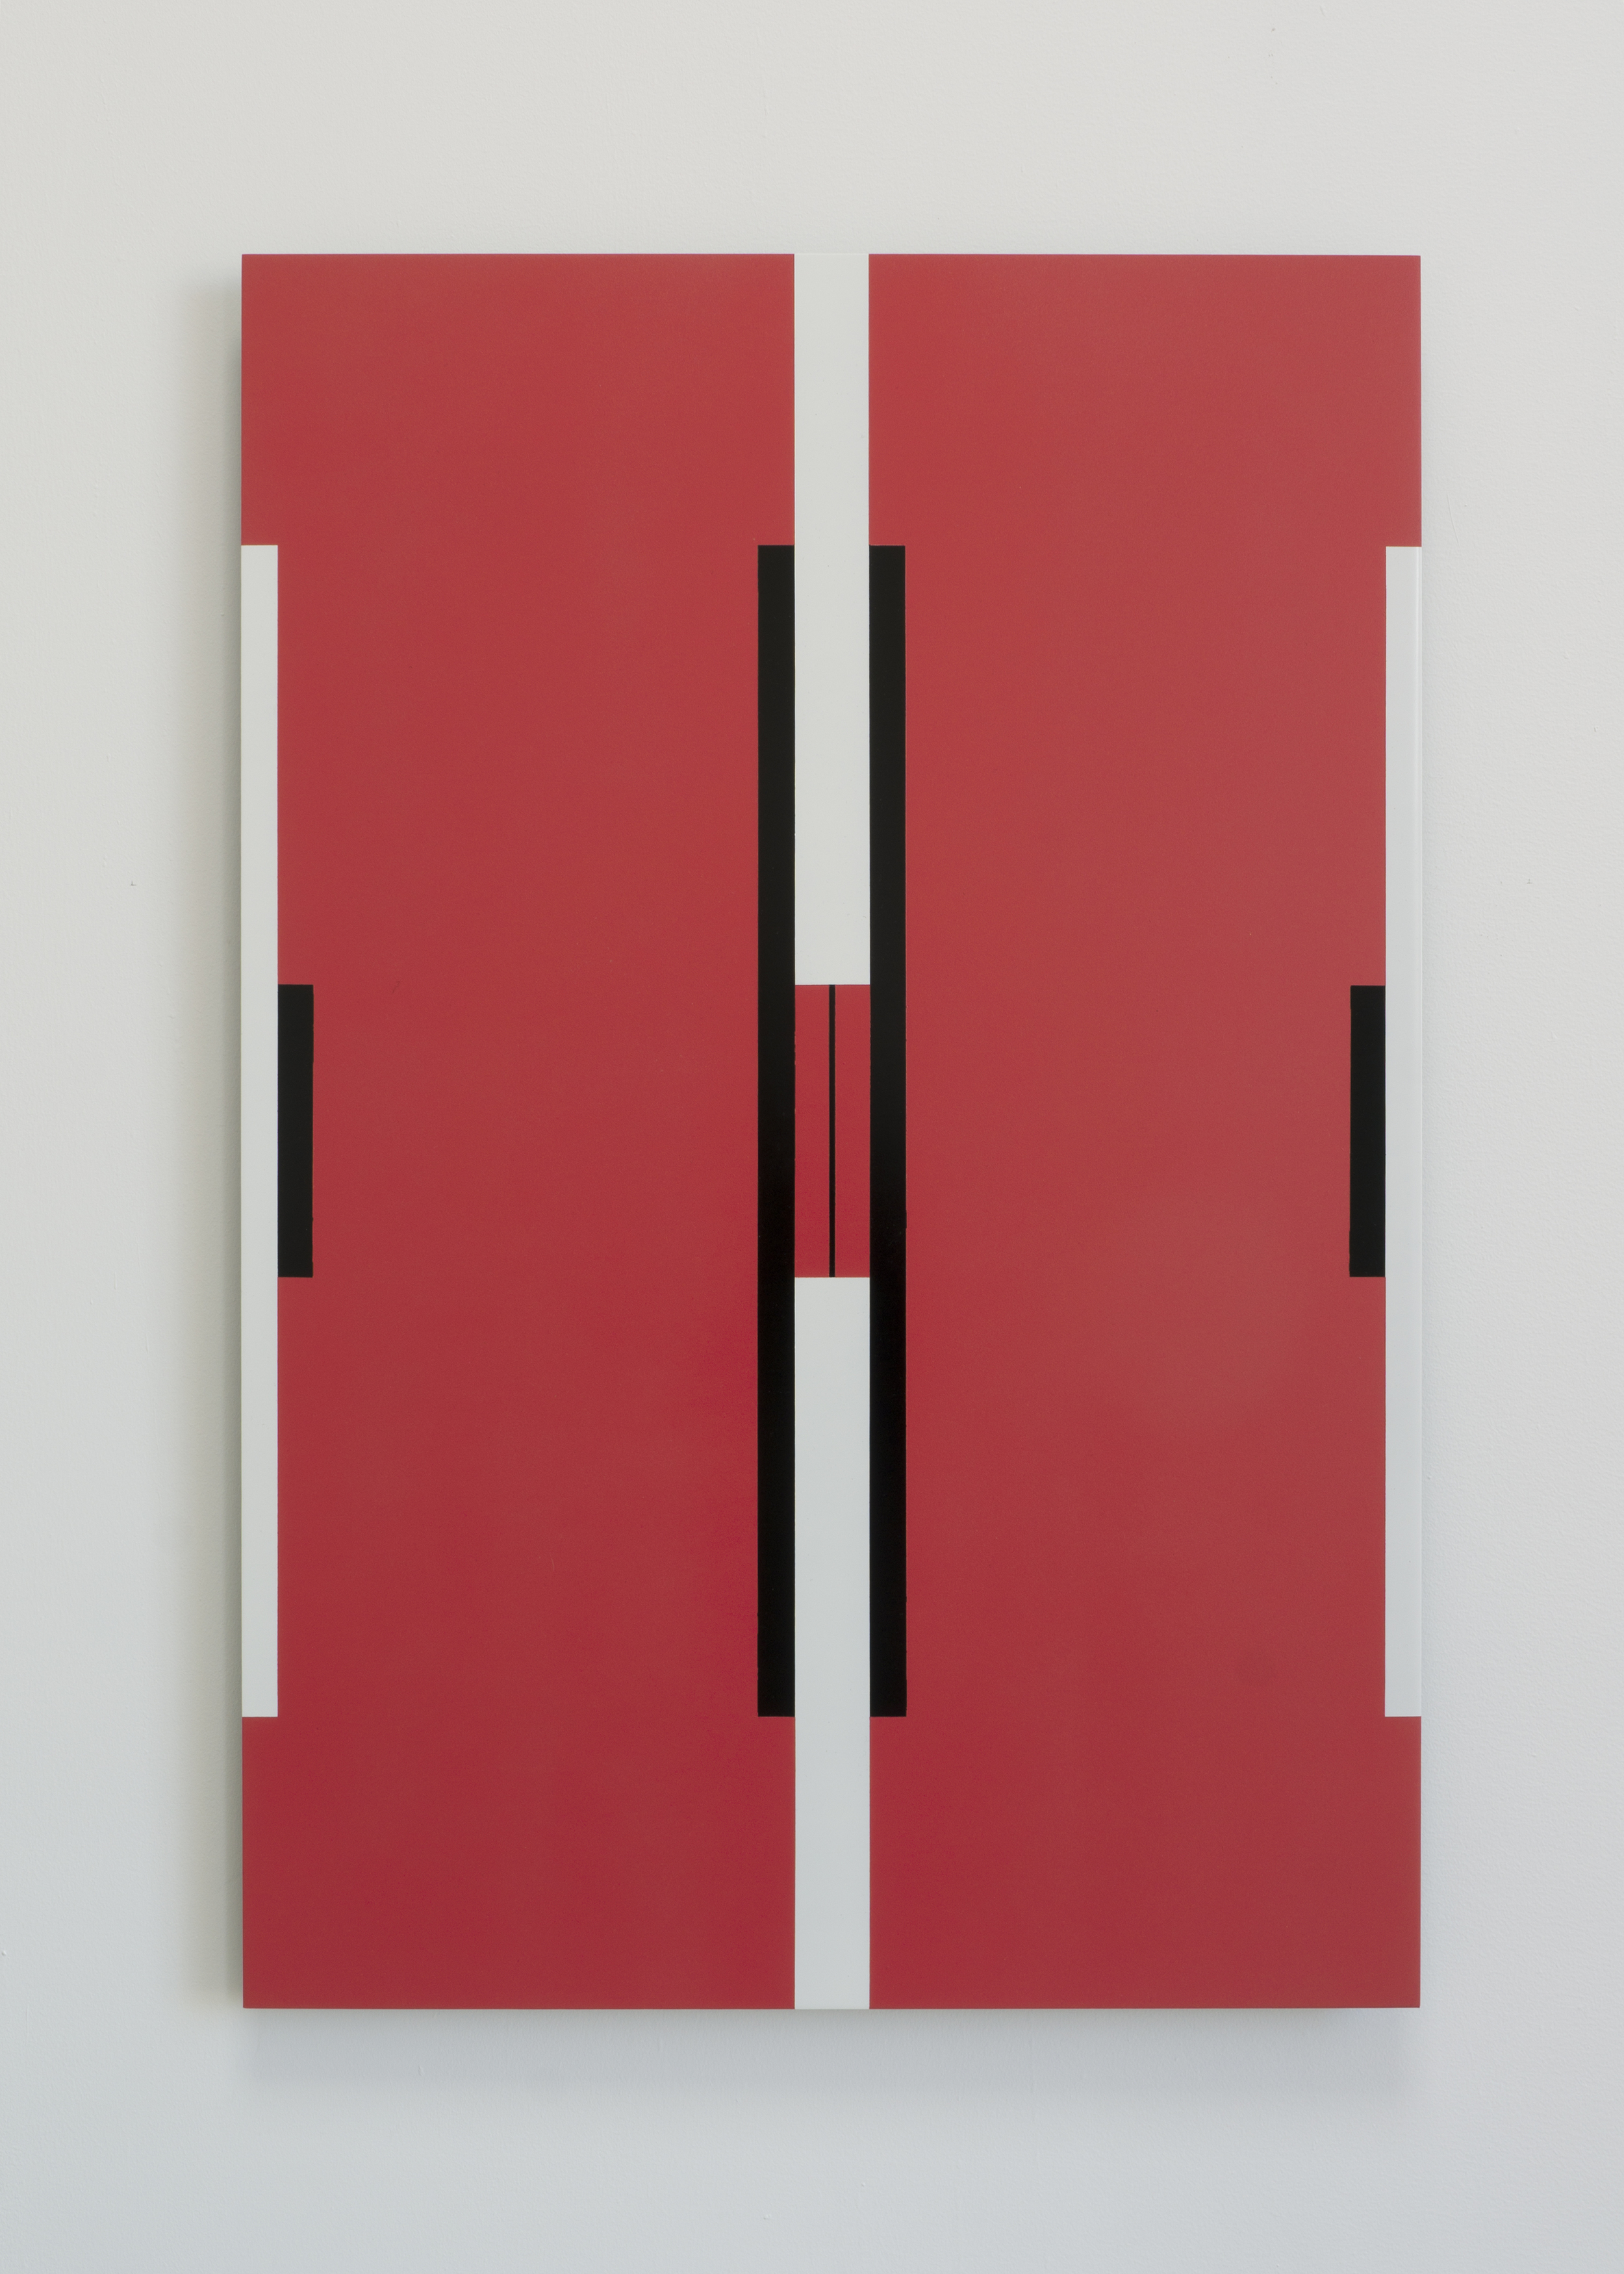  "Red Division"  2014  36" x 24"  spray paint on aluminum 